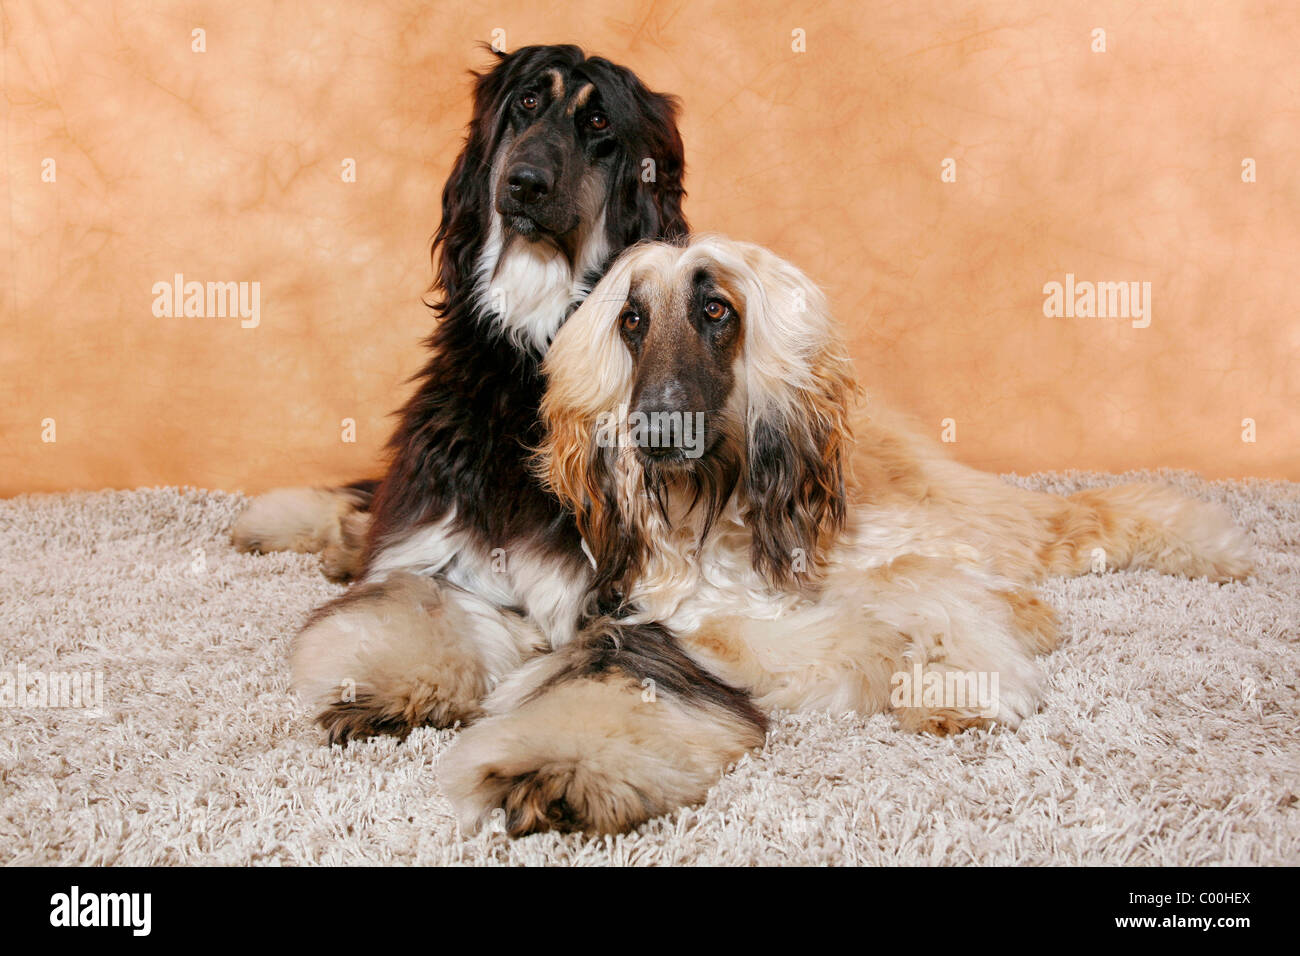 Afghanische Windhunde / Afghan Hounds Stock Photo